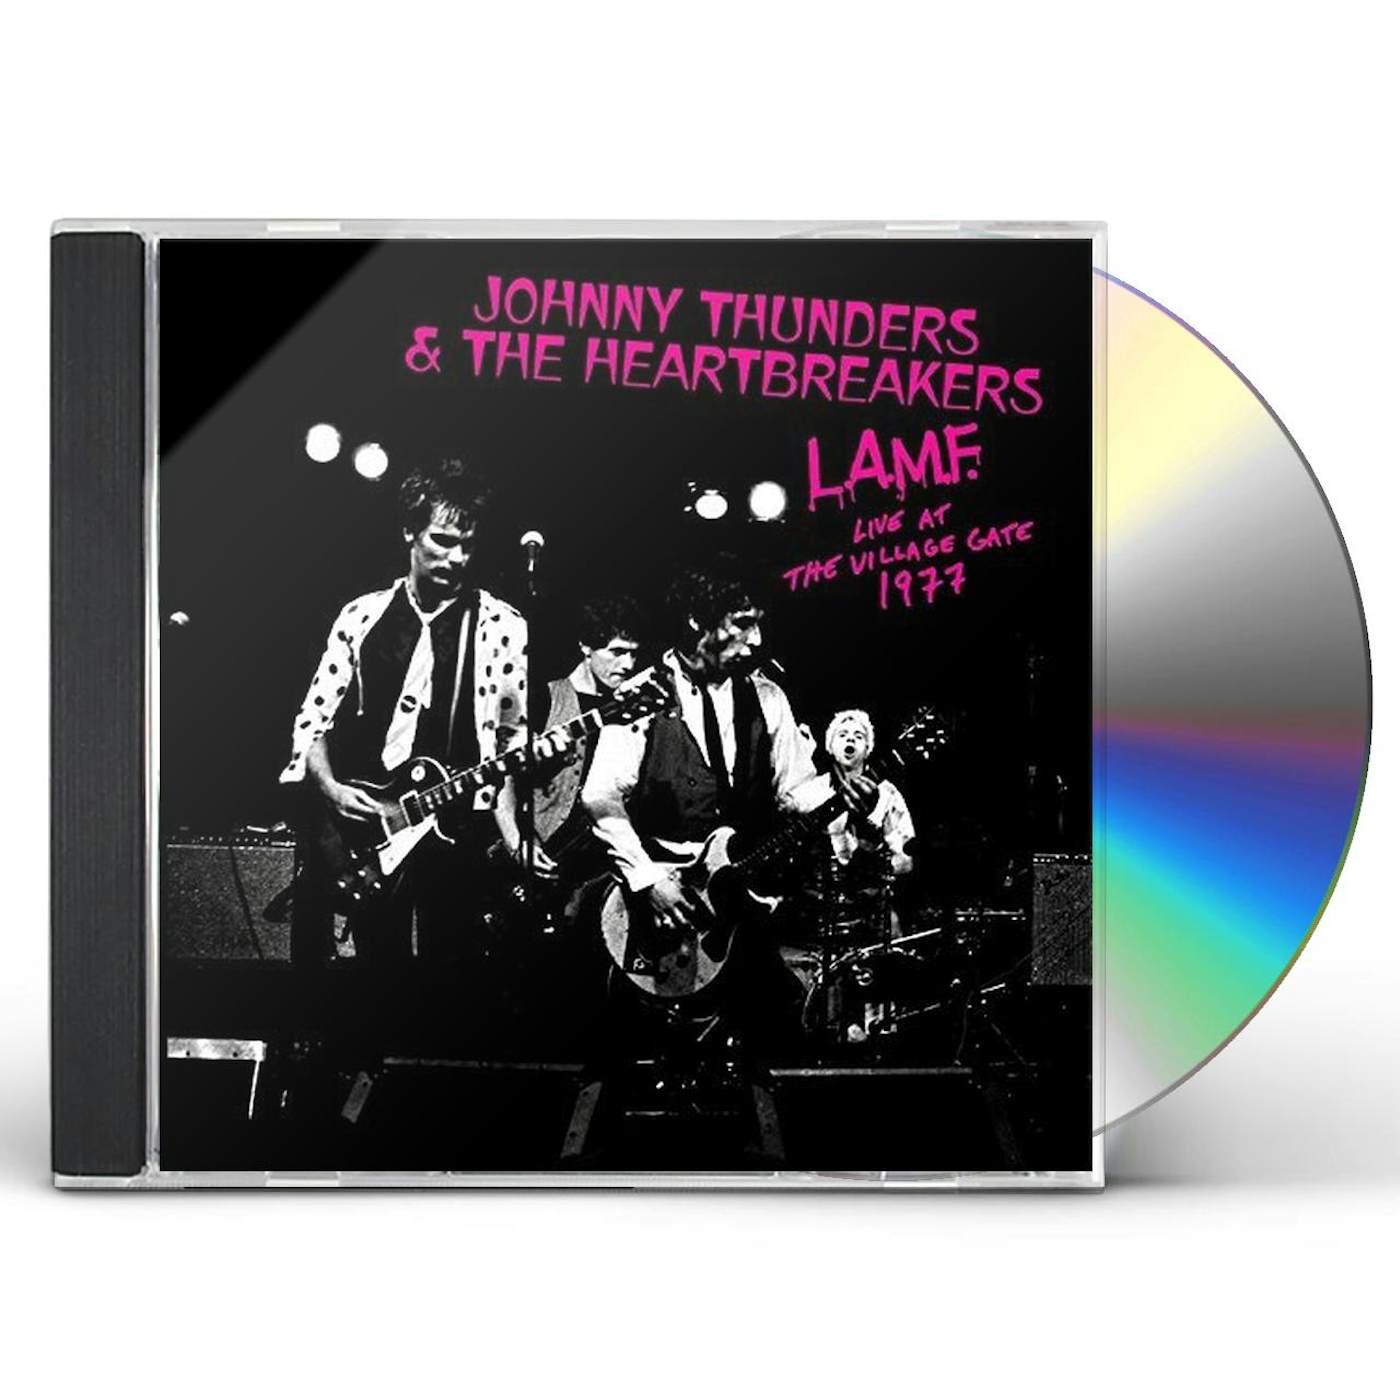 Johnny Thunders & The Heartbreakers L.A.M.F. - LIVE AT THE VILLAGE GATE 1977 CD